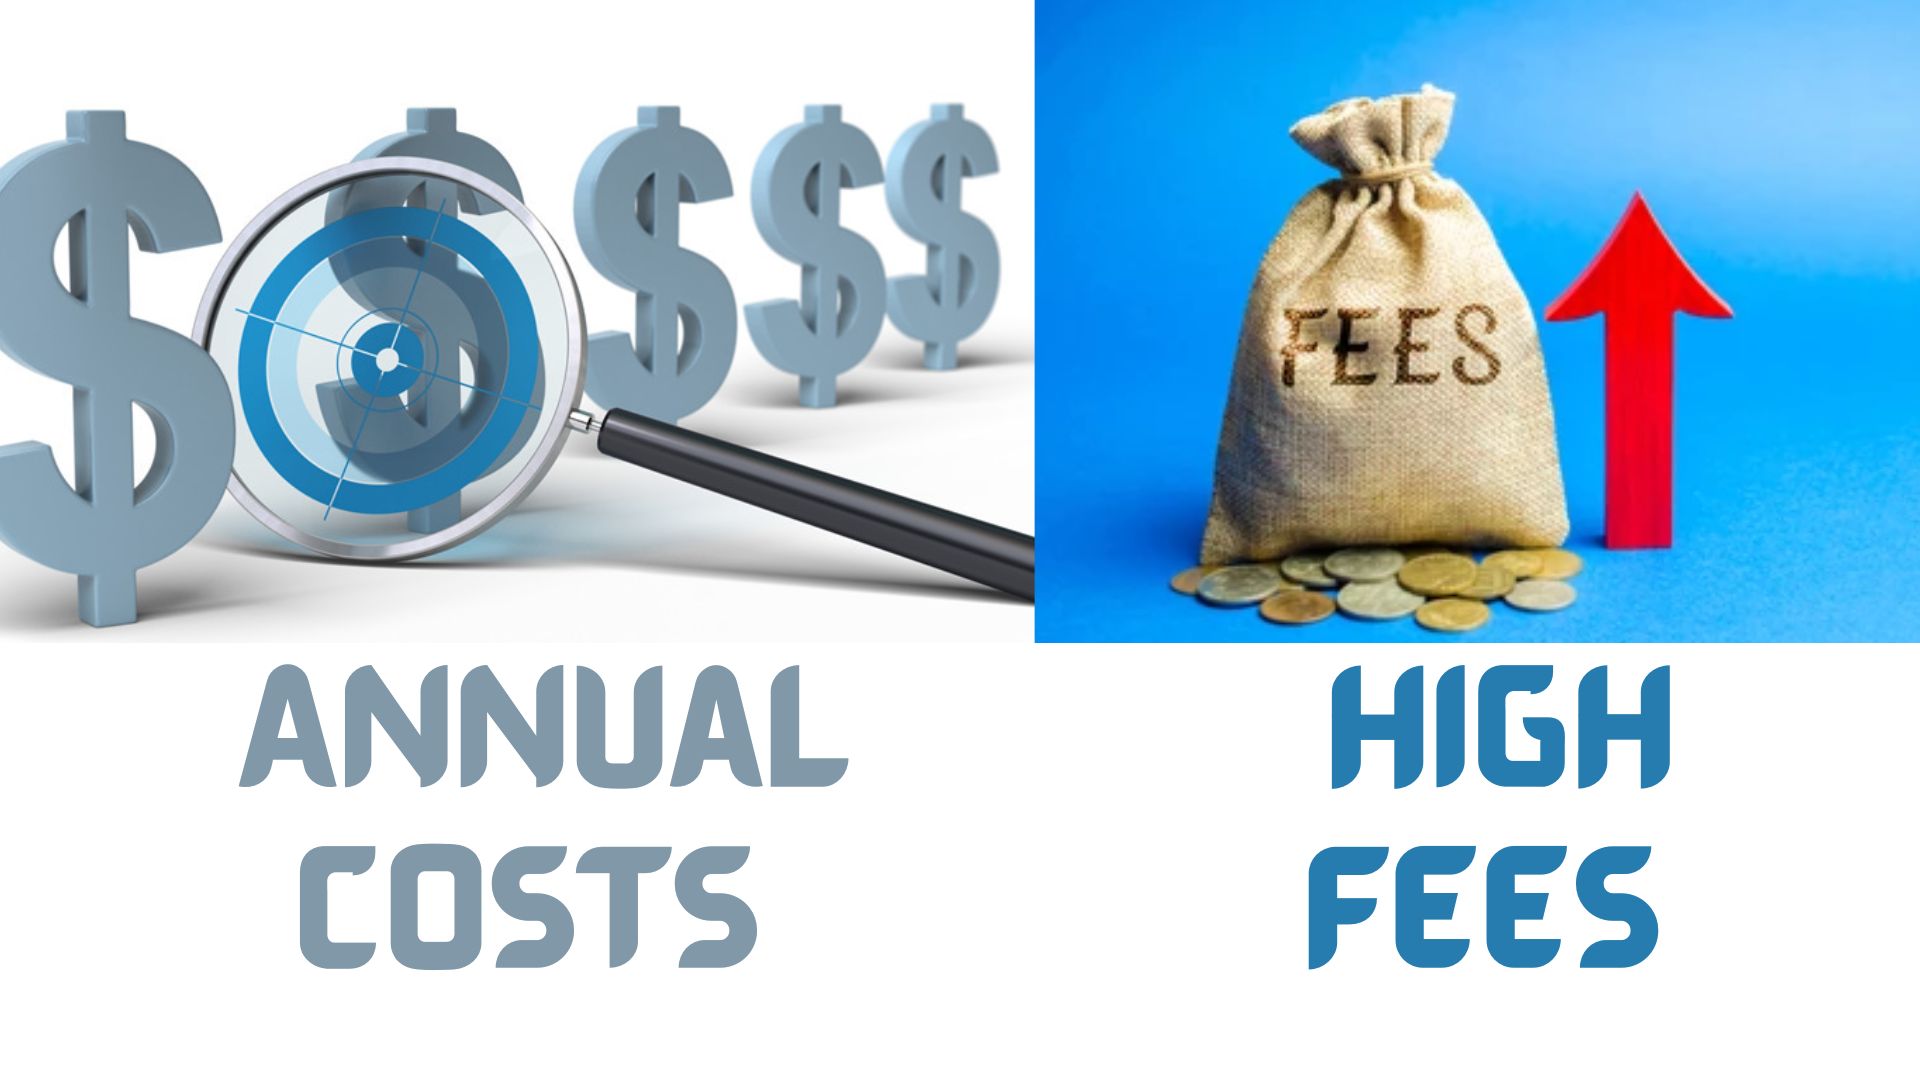 High Fees and Annual Costs